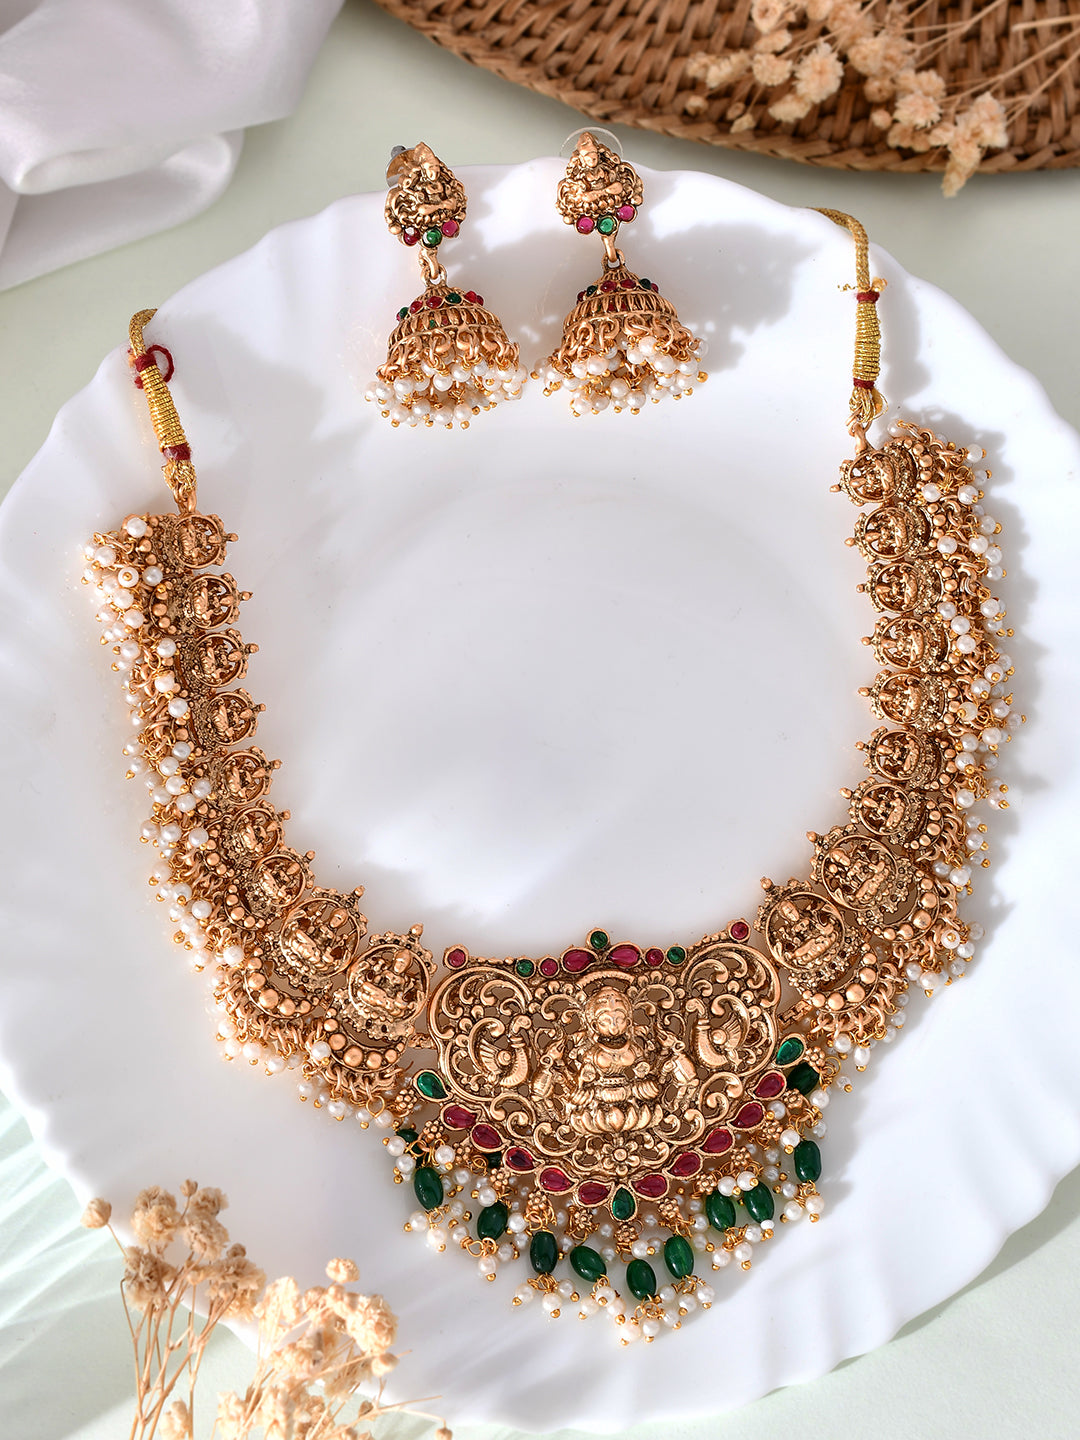 this Gold plated South Indian Traditional Heavy Temple jewellery set is the perfect accessory for any special occasion. The intricate design and traditional look add an air of elegance and grace to any outfit, making it an ideal choice for women, brides, and girls.